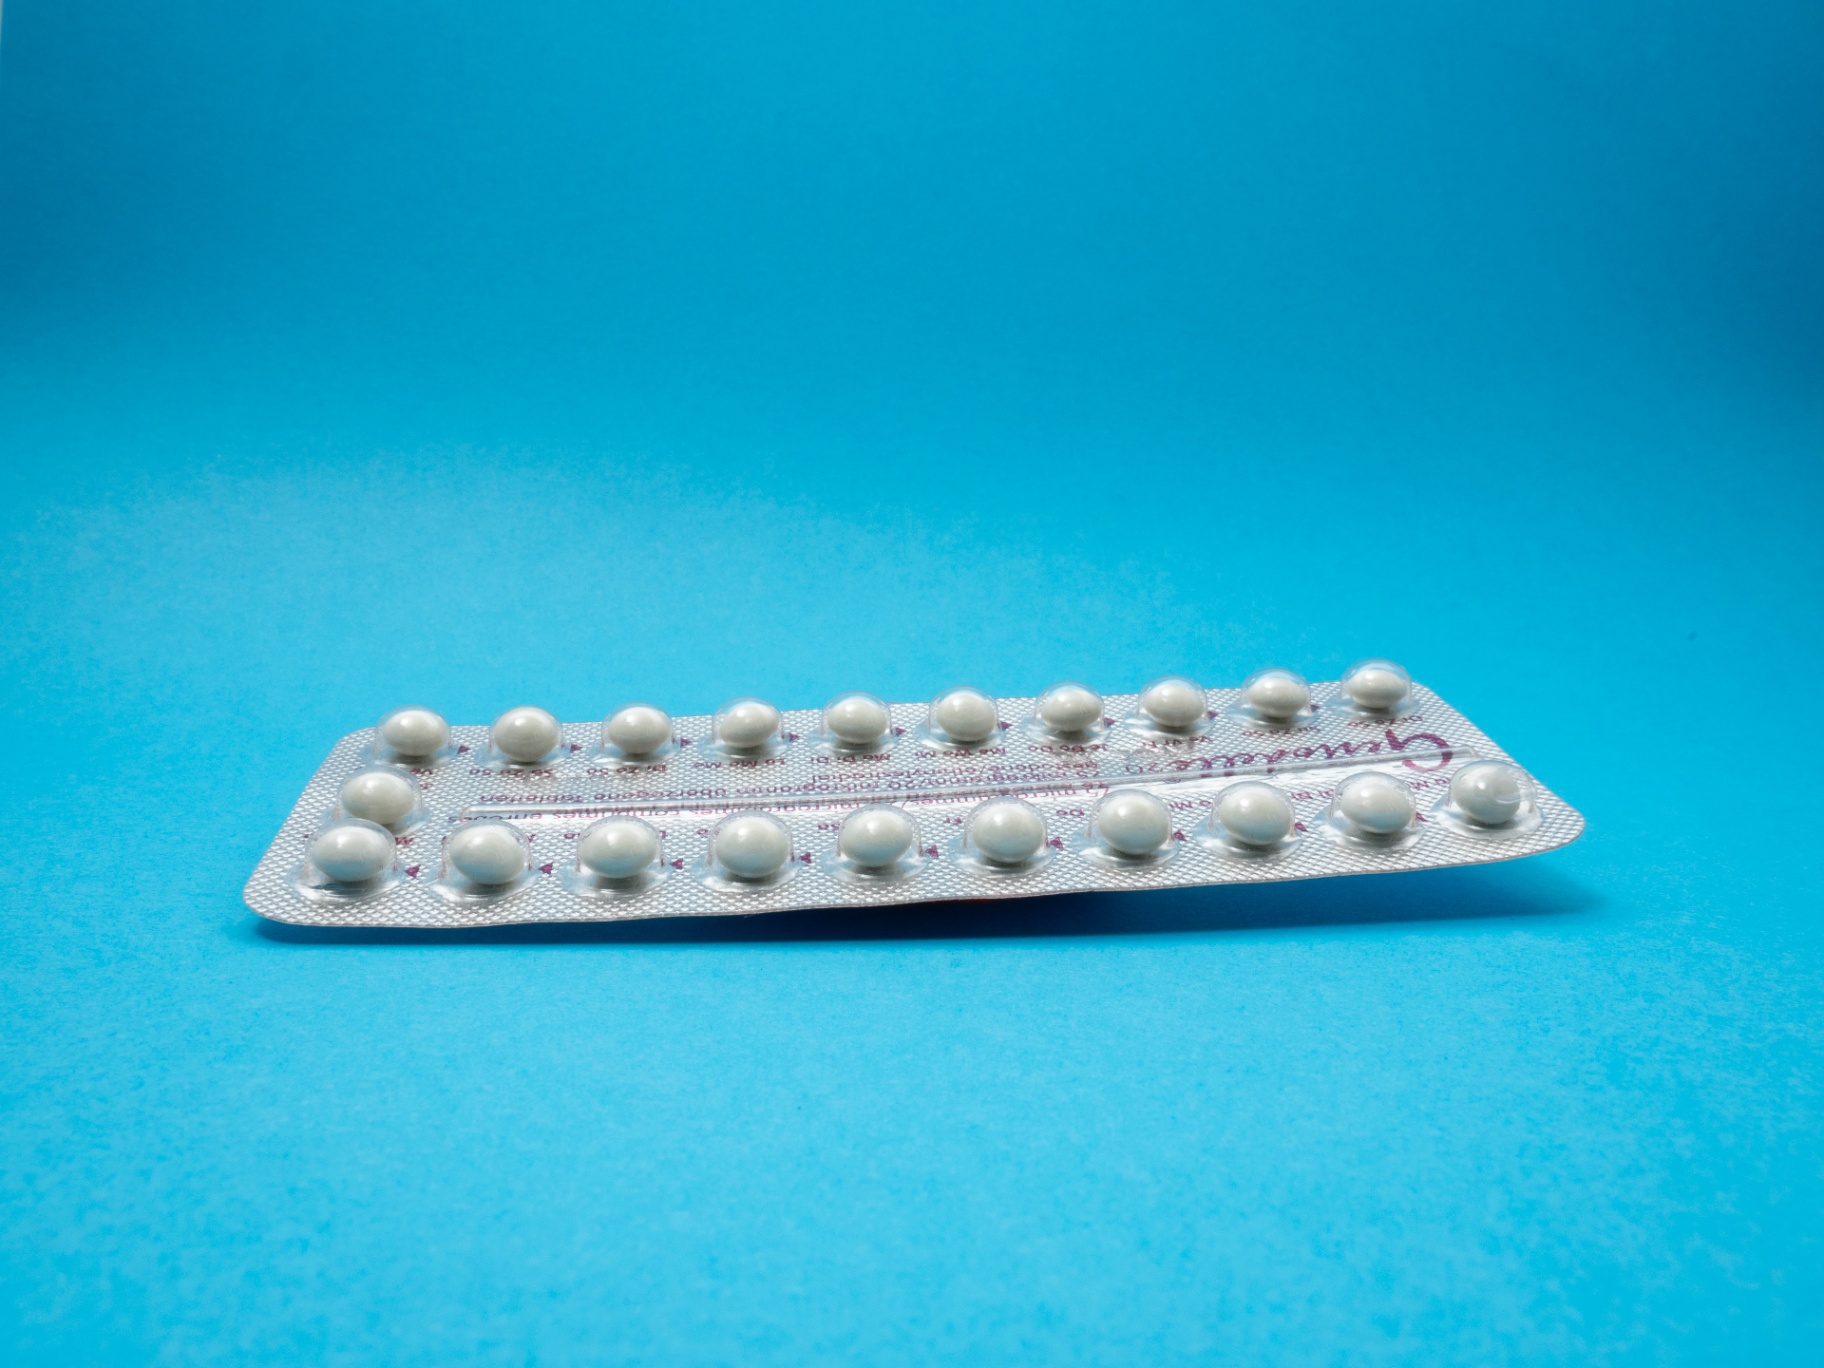 Birth Control - Which Is the Best Method?